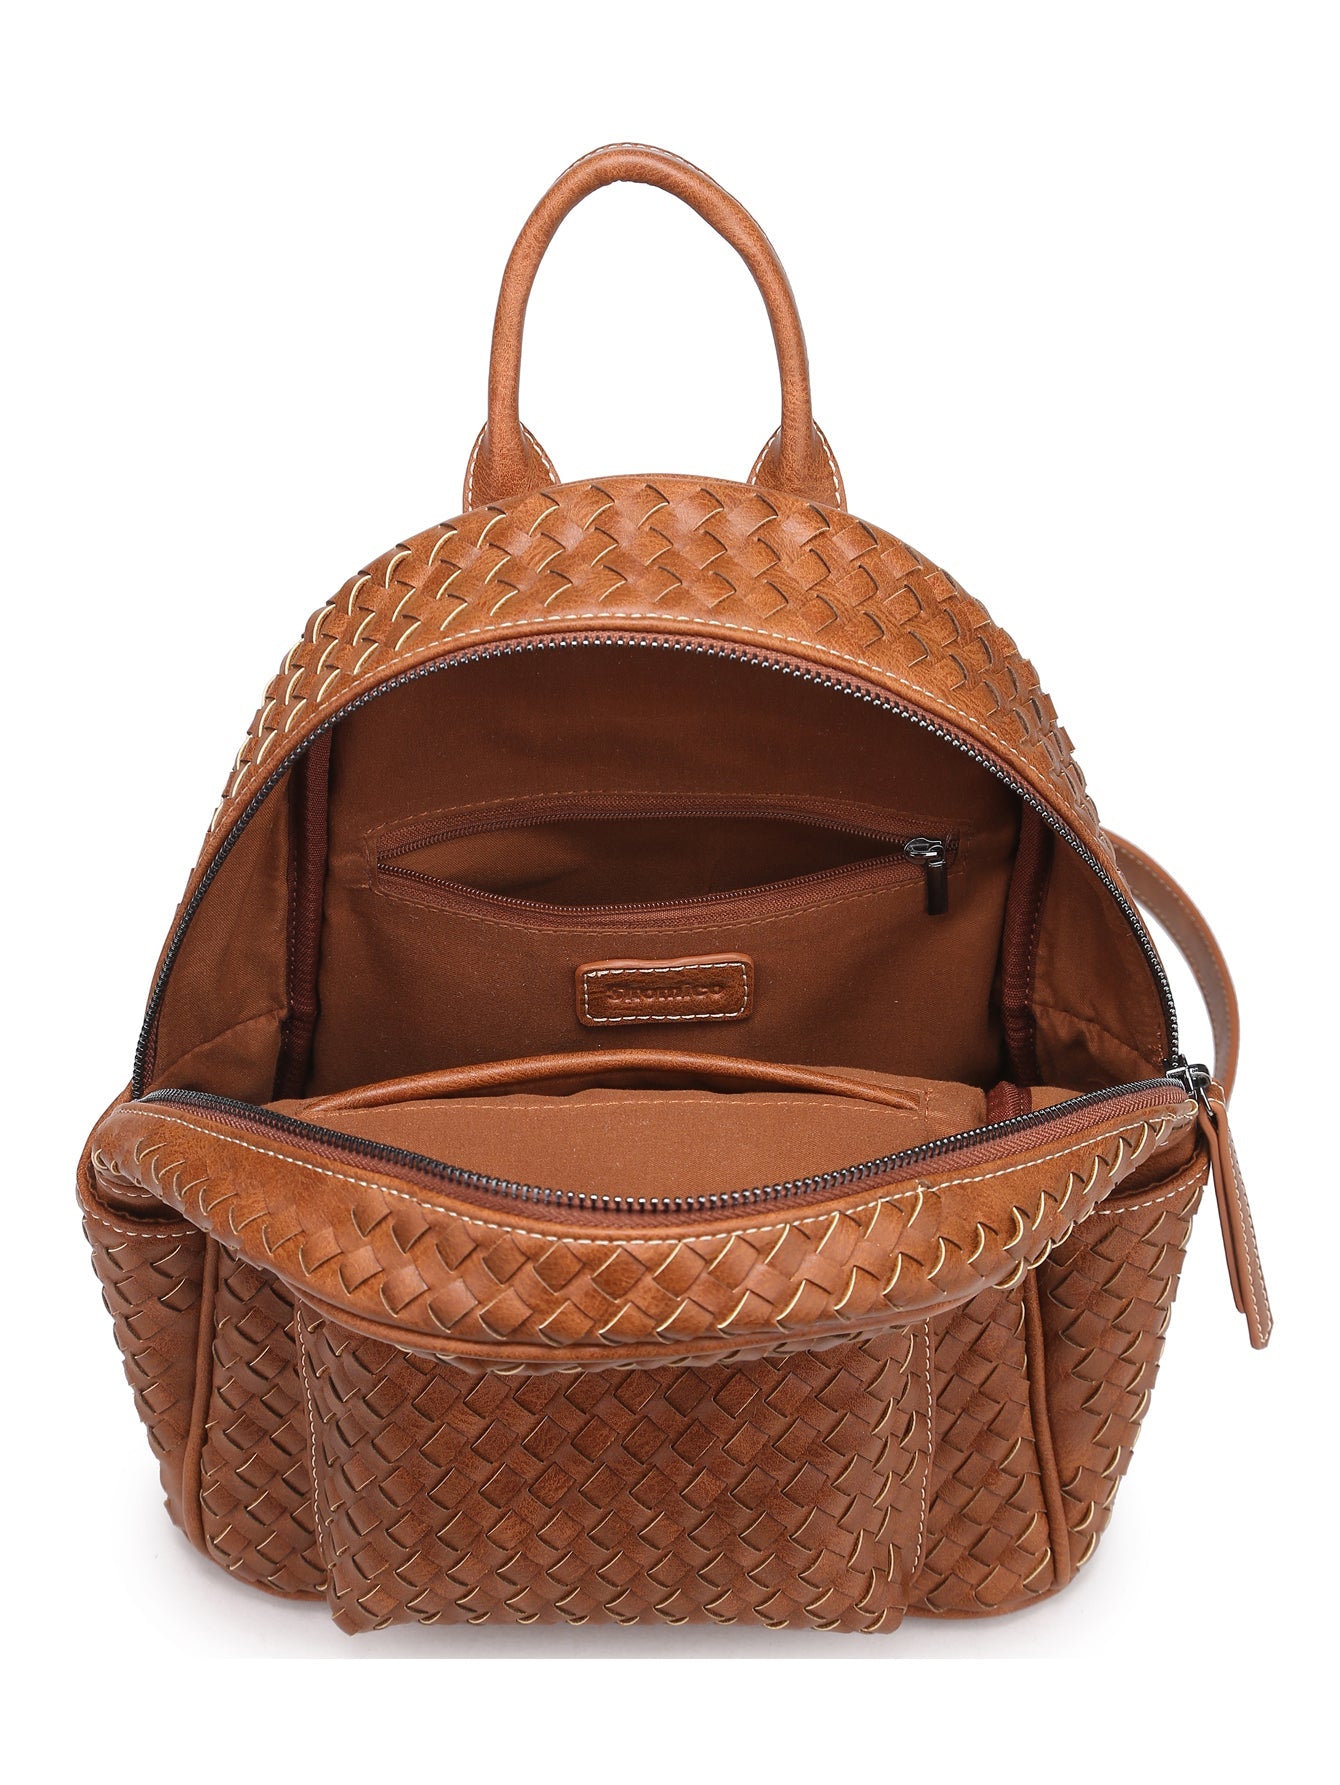 Woven backpack purse for women camel MT1086-13 BR